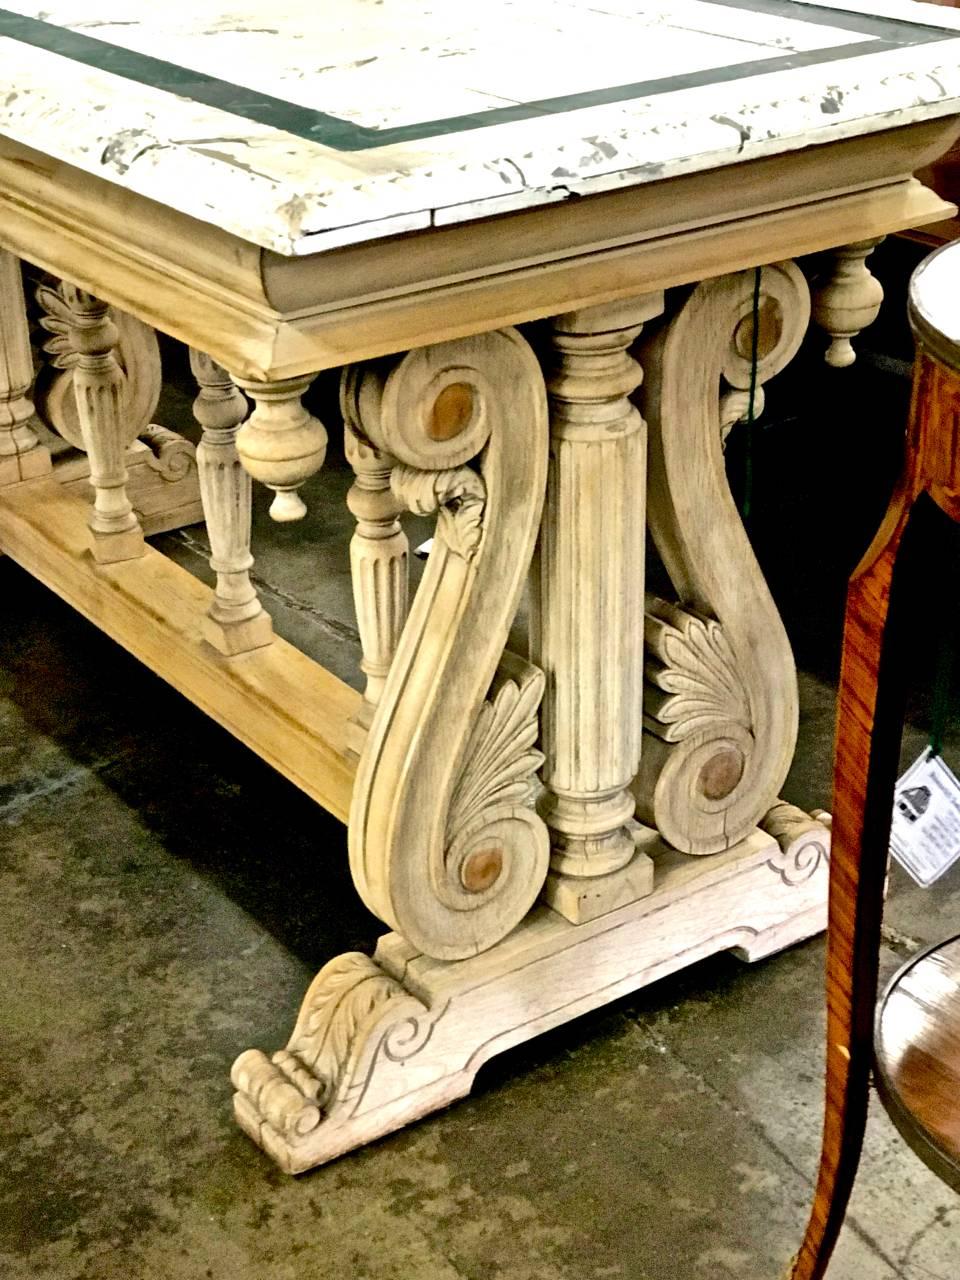 This is a classic 19th century beautifully carved Italian Renaissance Revival library or console table that has been stripped to its raw wood and having acquired a good natural patina.